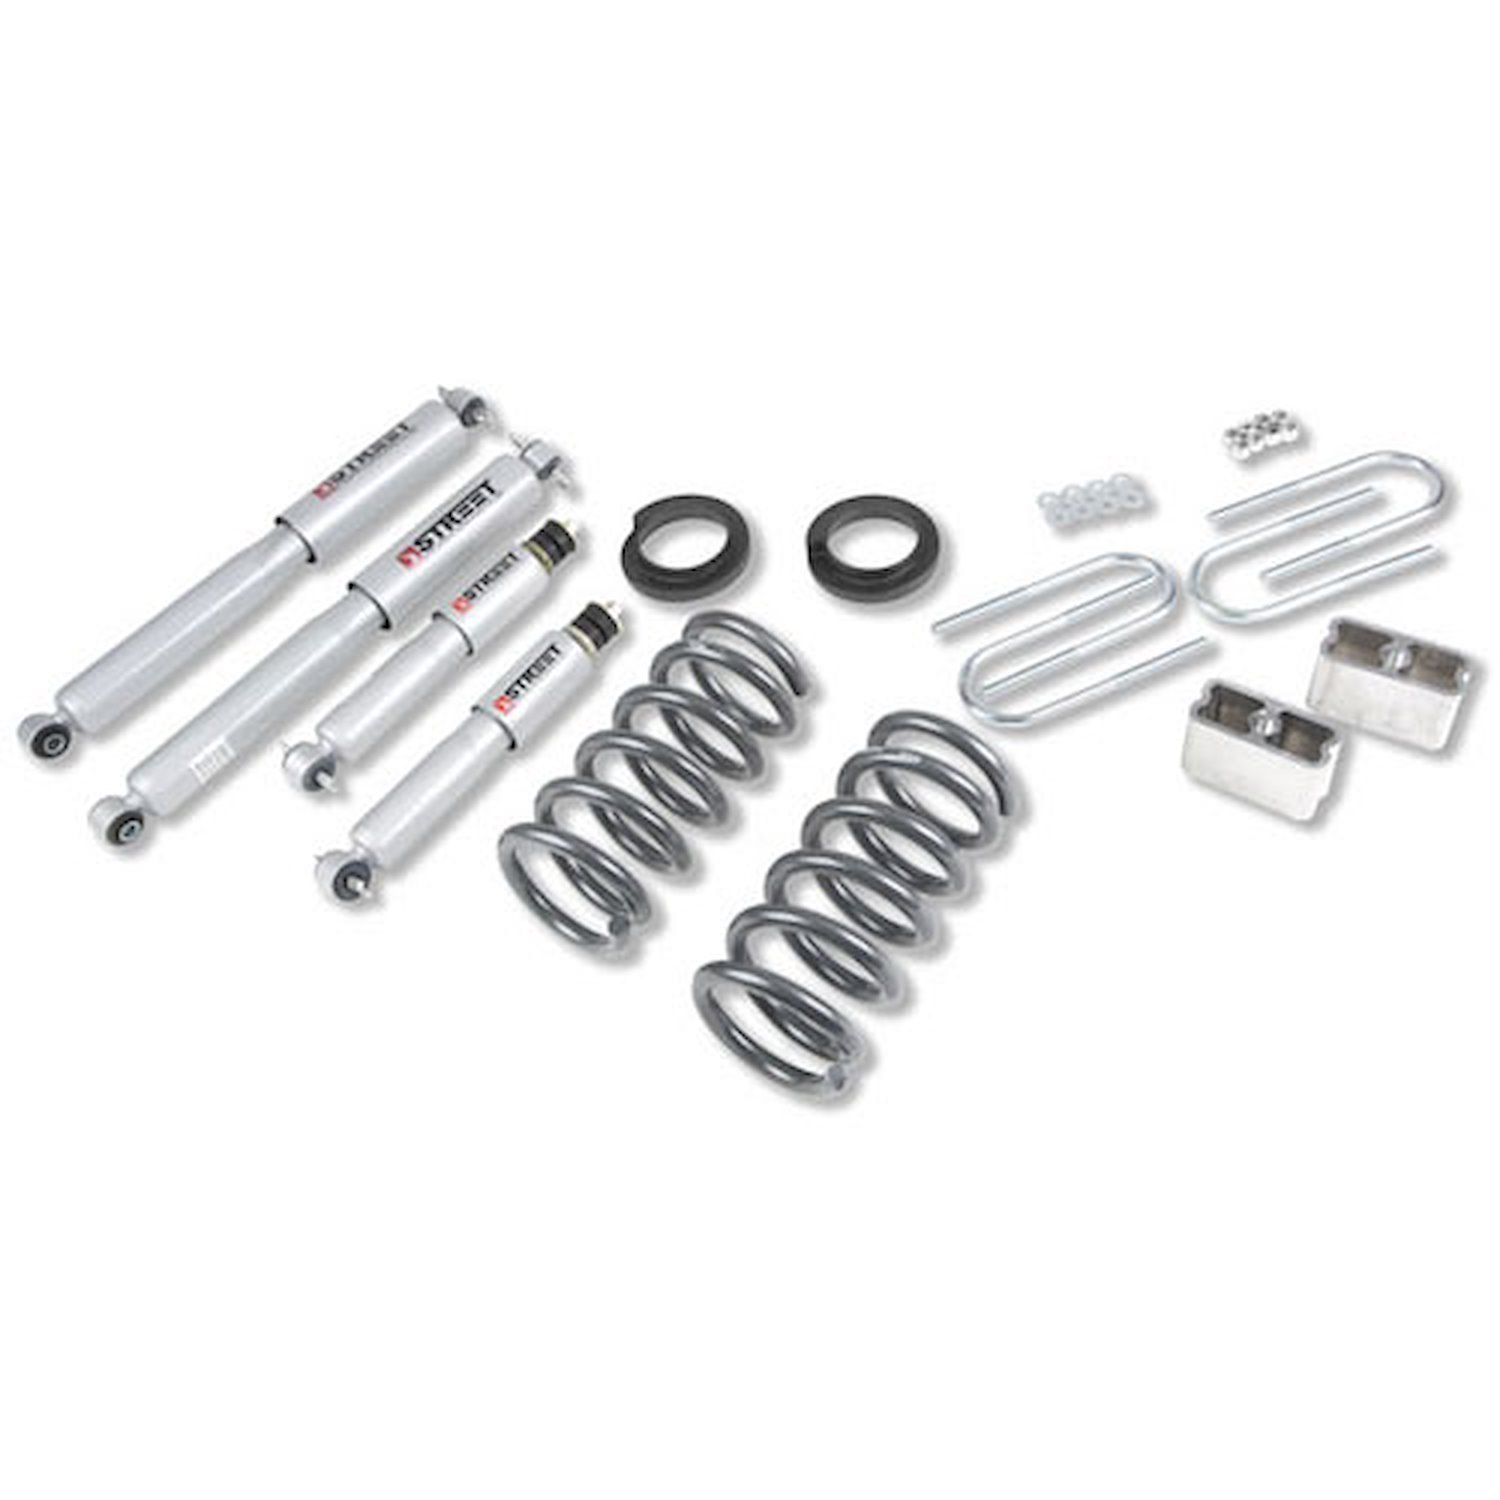 Complete Lowering Kit for 1994-2004 Chevy S10/GMC S15